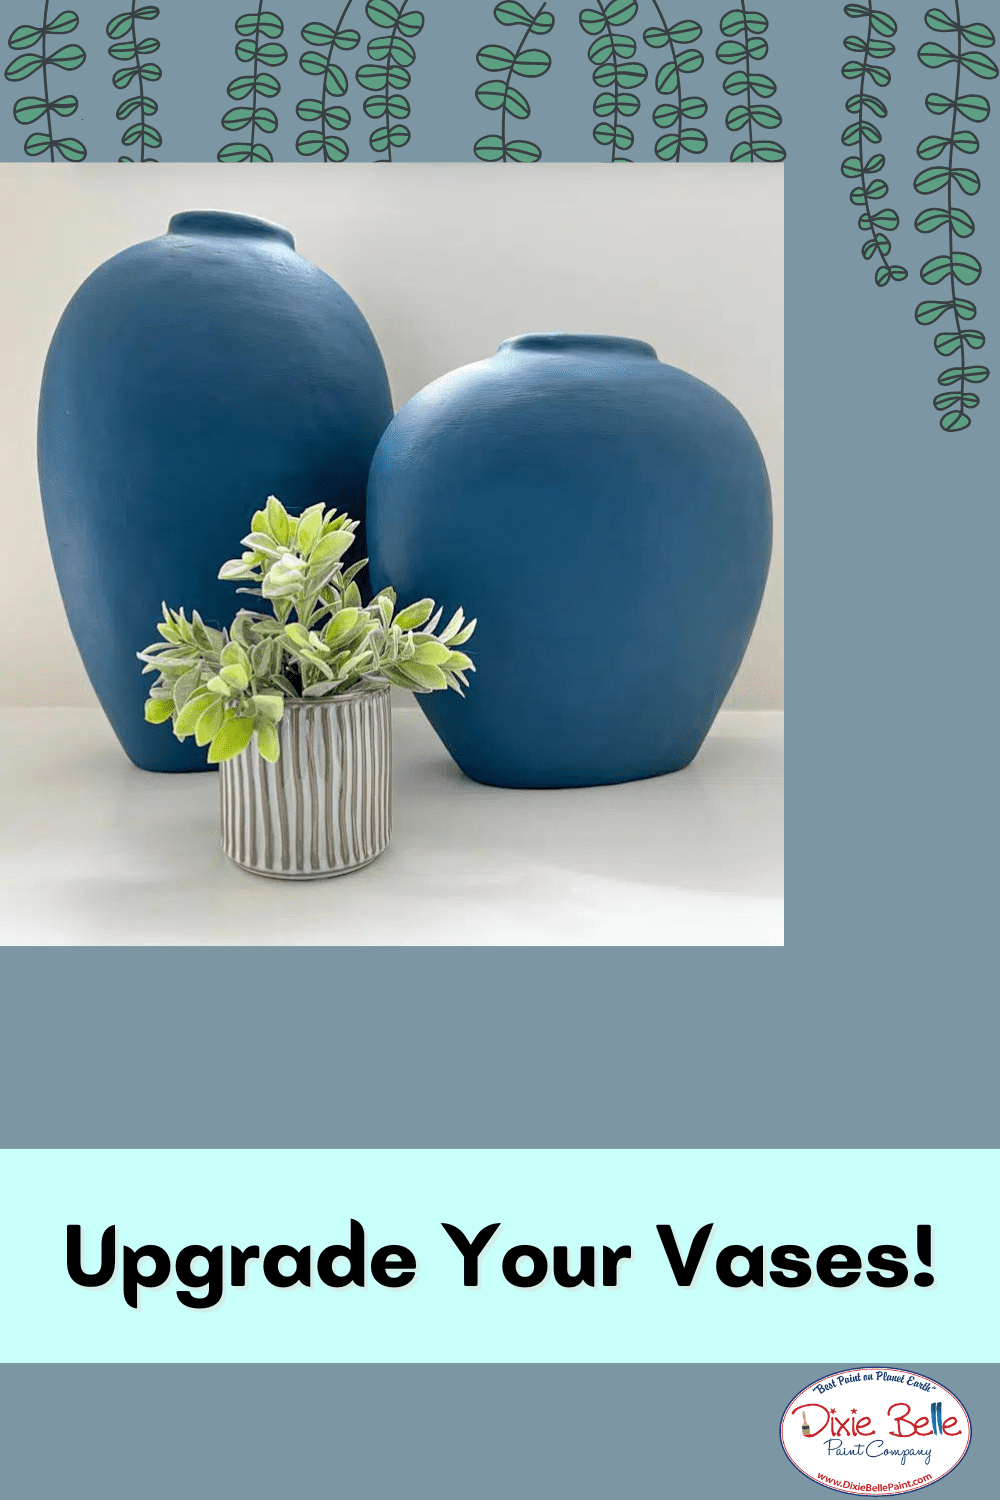 Upgrade Your Vase with Terra Clay Paint!